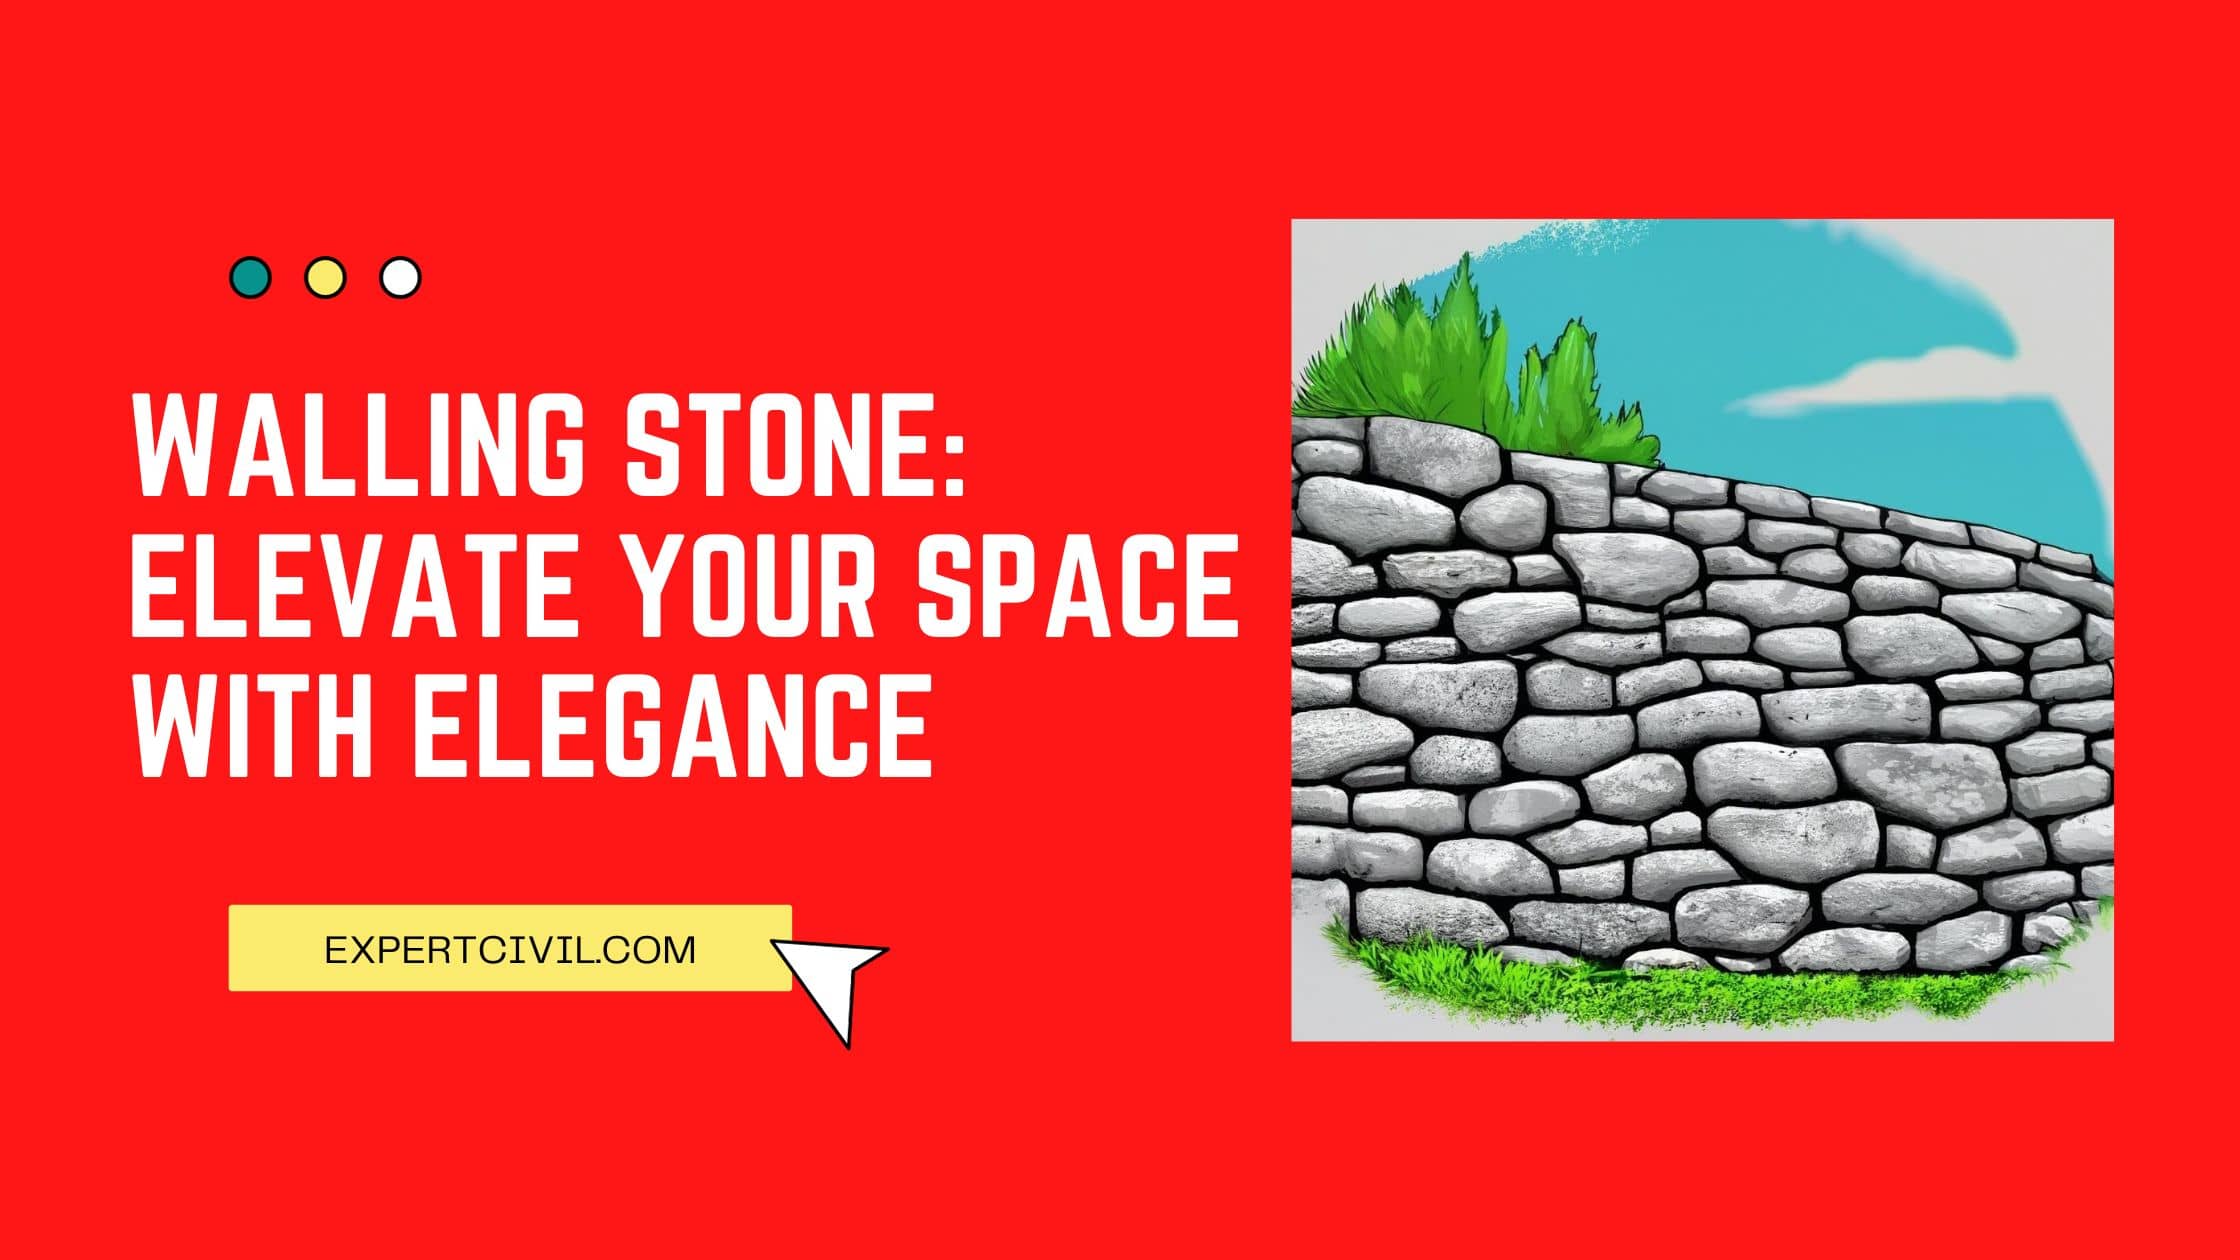 Walling Stone: Elevate Your Space with Elegance